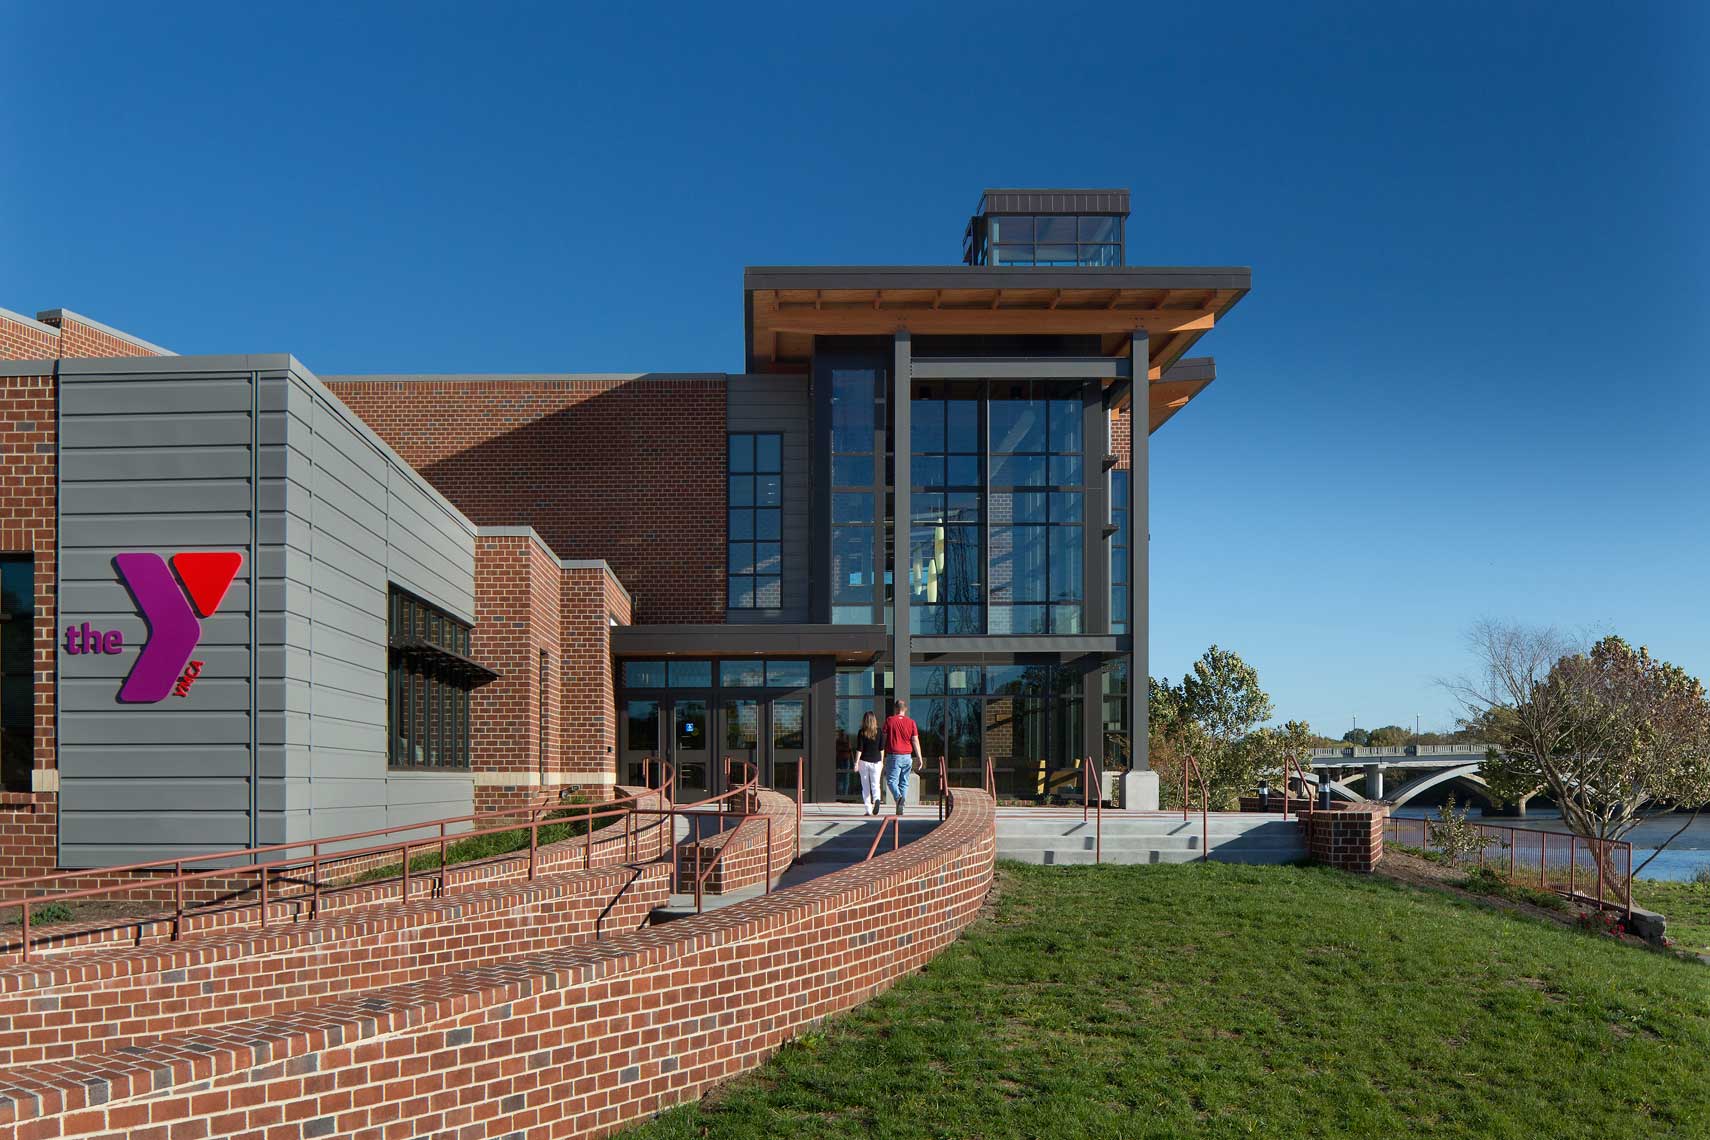 An exterior walkway at the entrance of the Danville Family YMCA